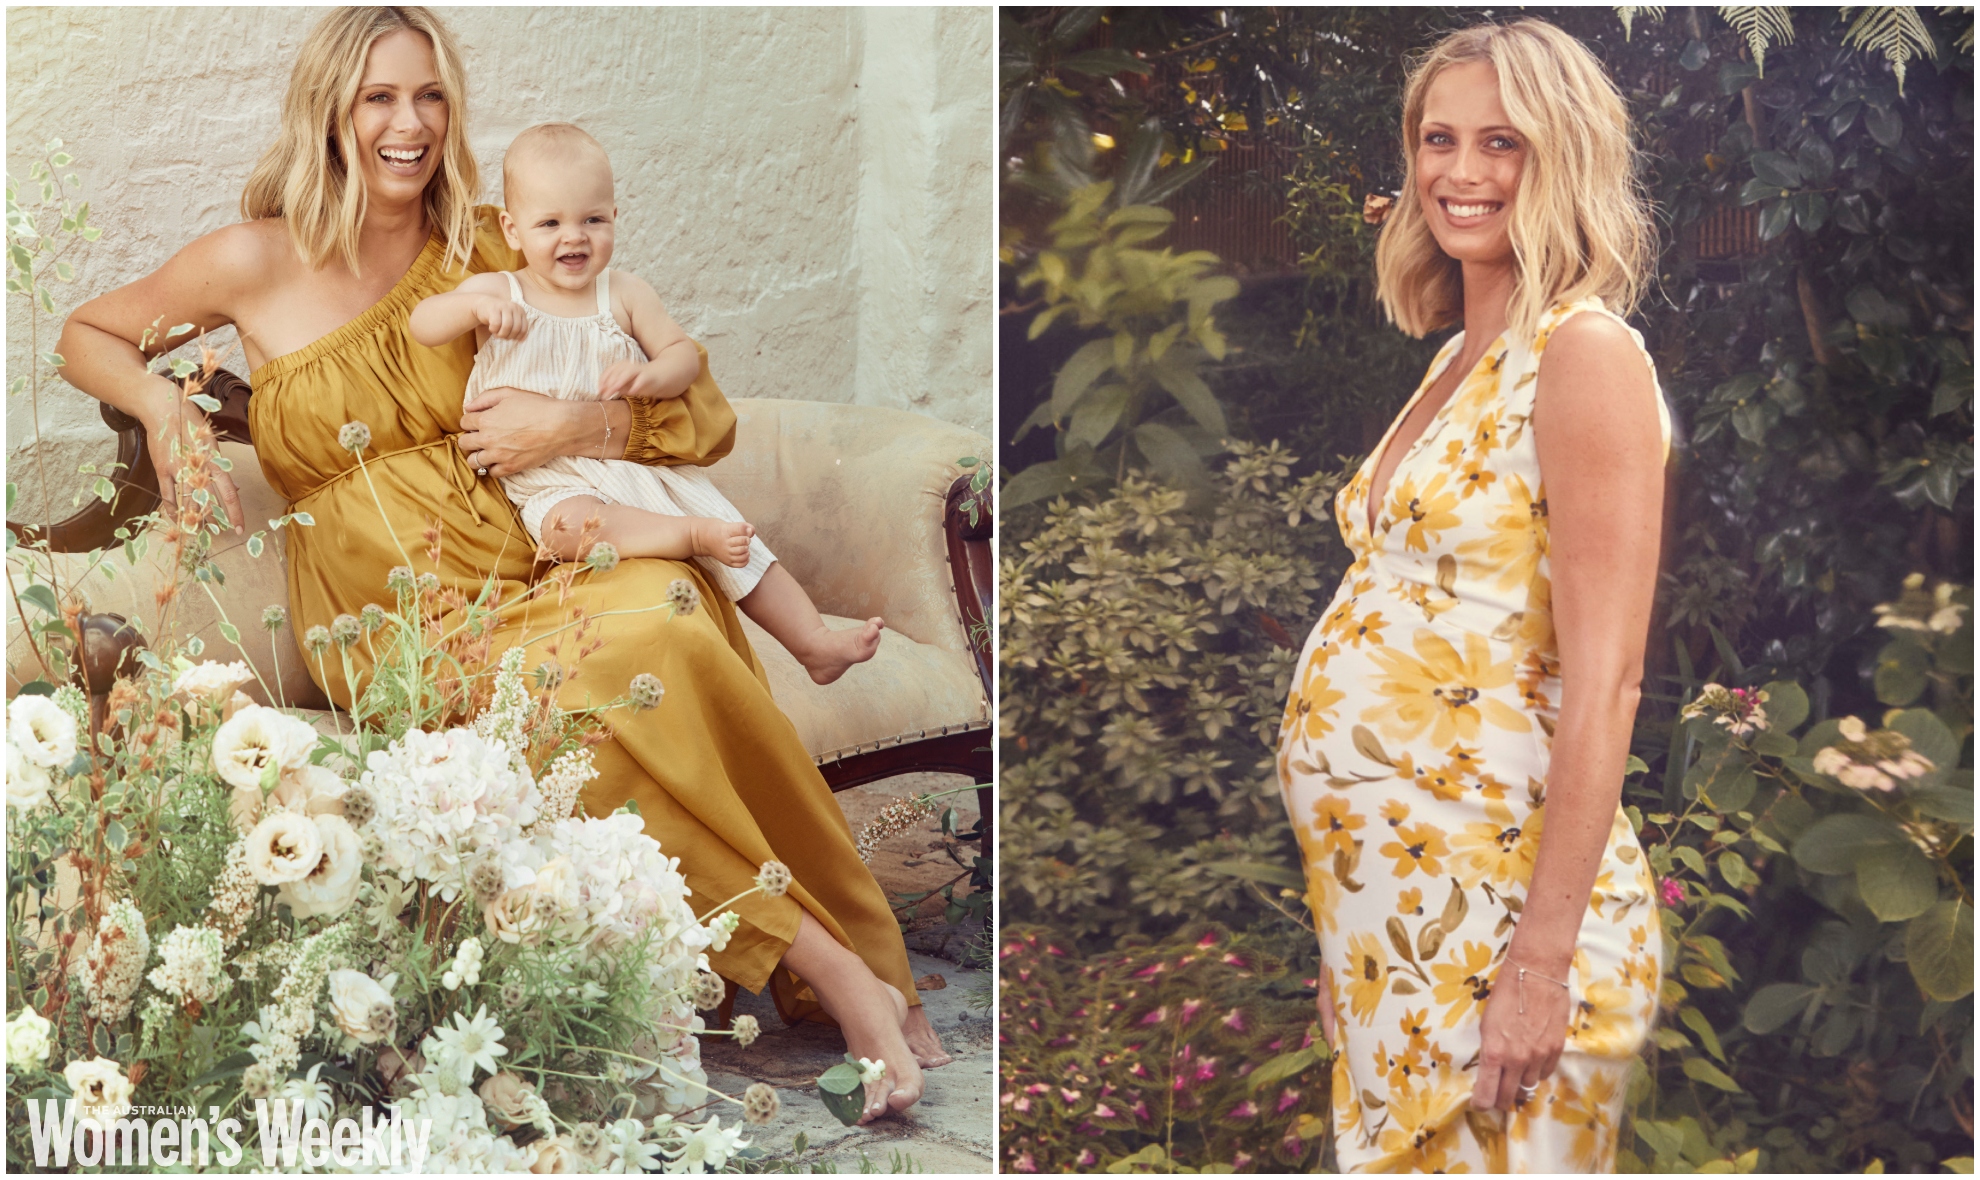 Sylvia Jeffreys’ beautiful chaos: As she prepares to welcome her second son, Sylvia reveals why she’s never been happier, both in life and marriage